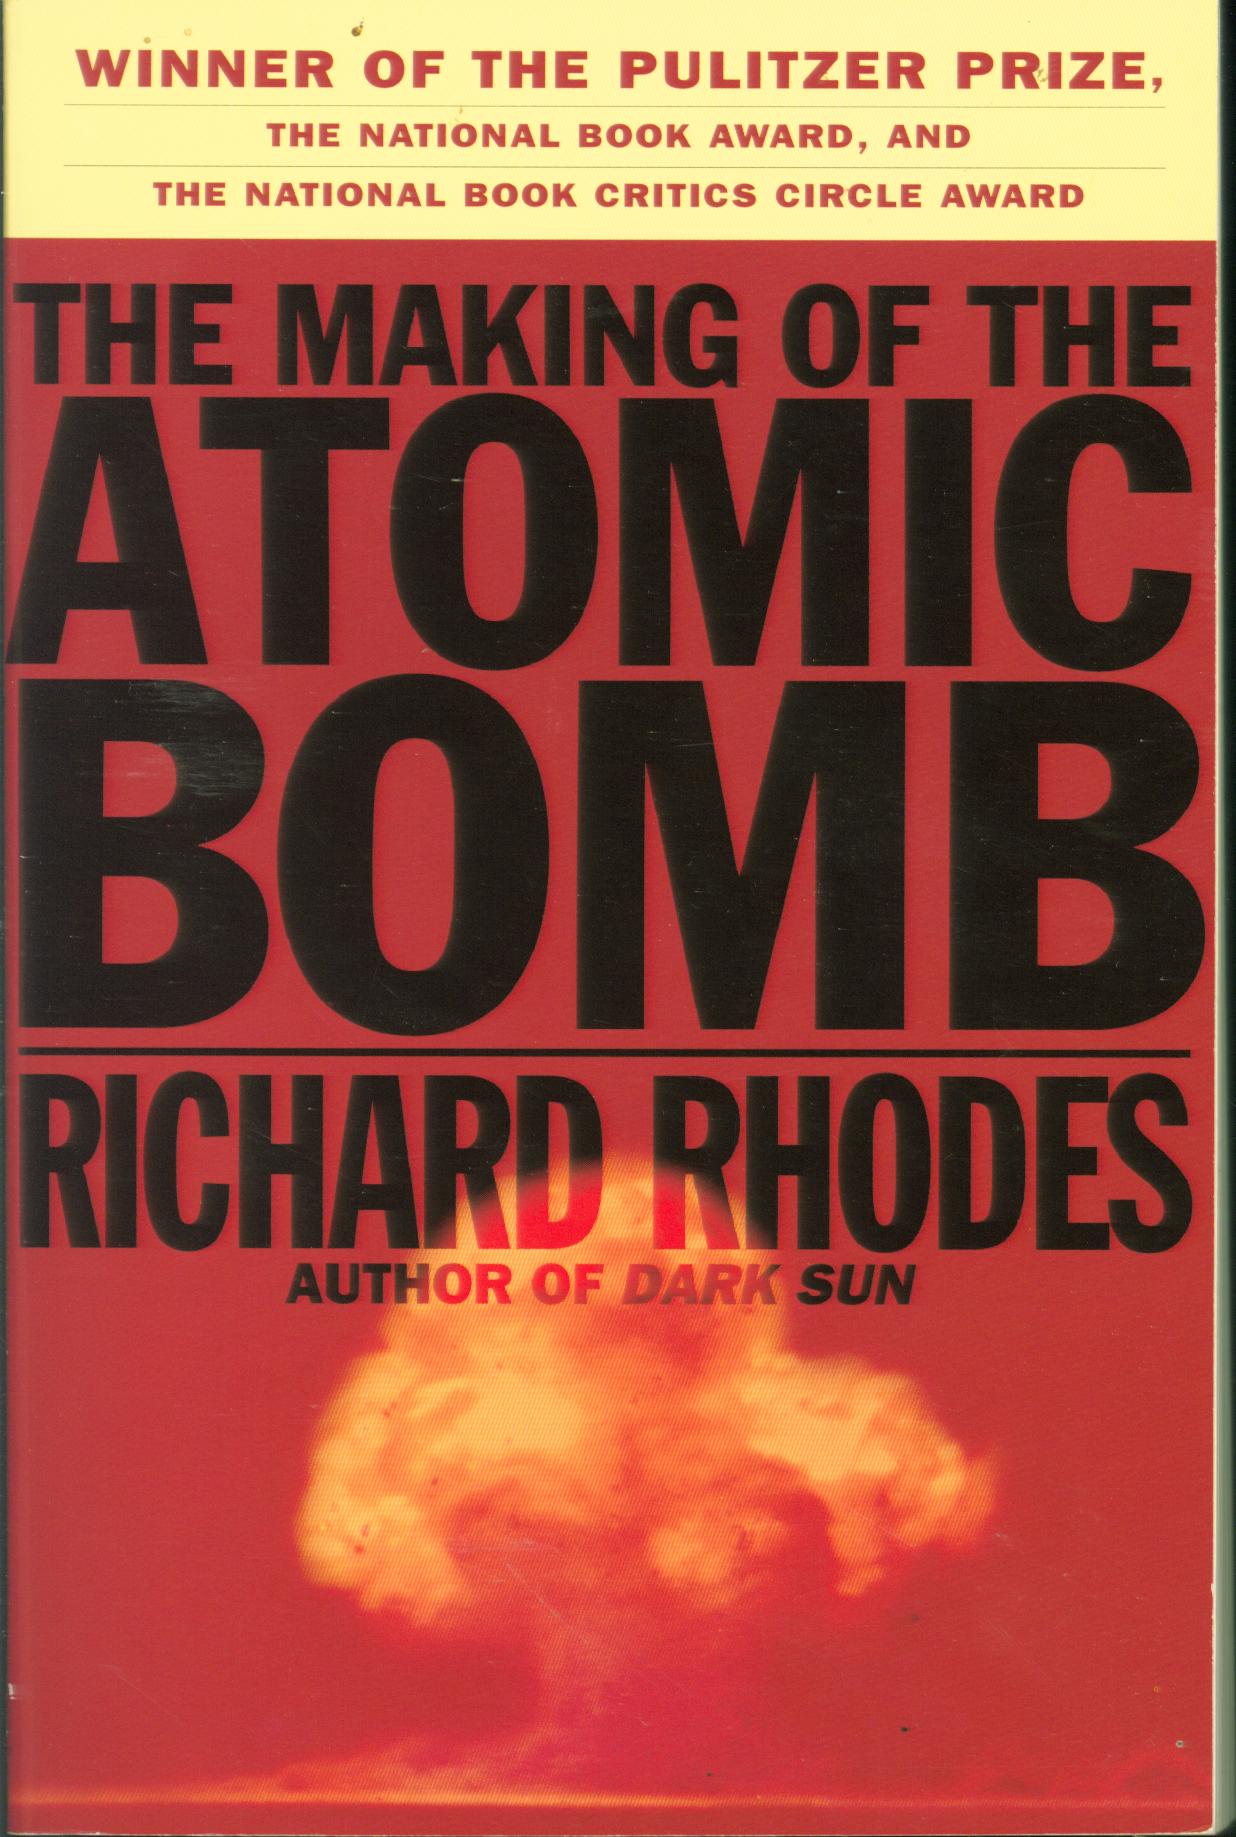 THE MAKING OF THE ATOMIC BOMB